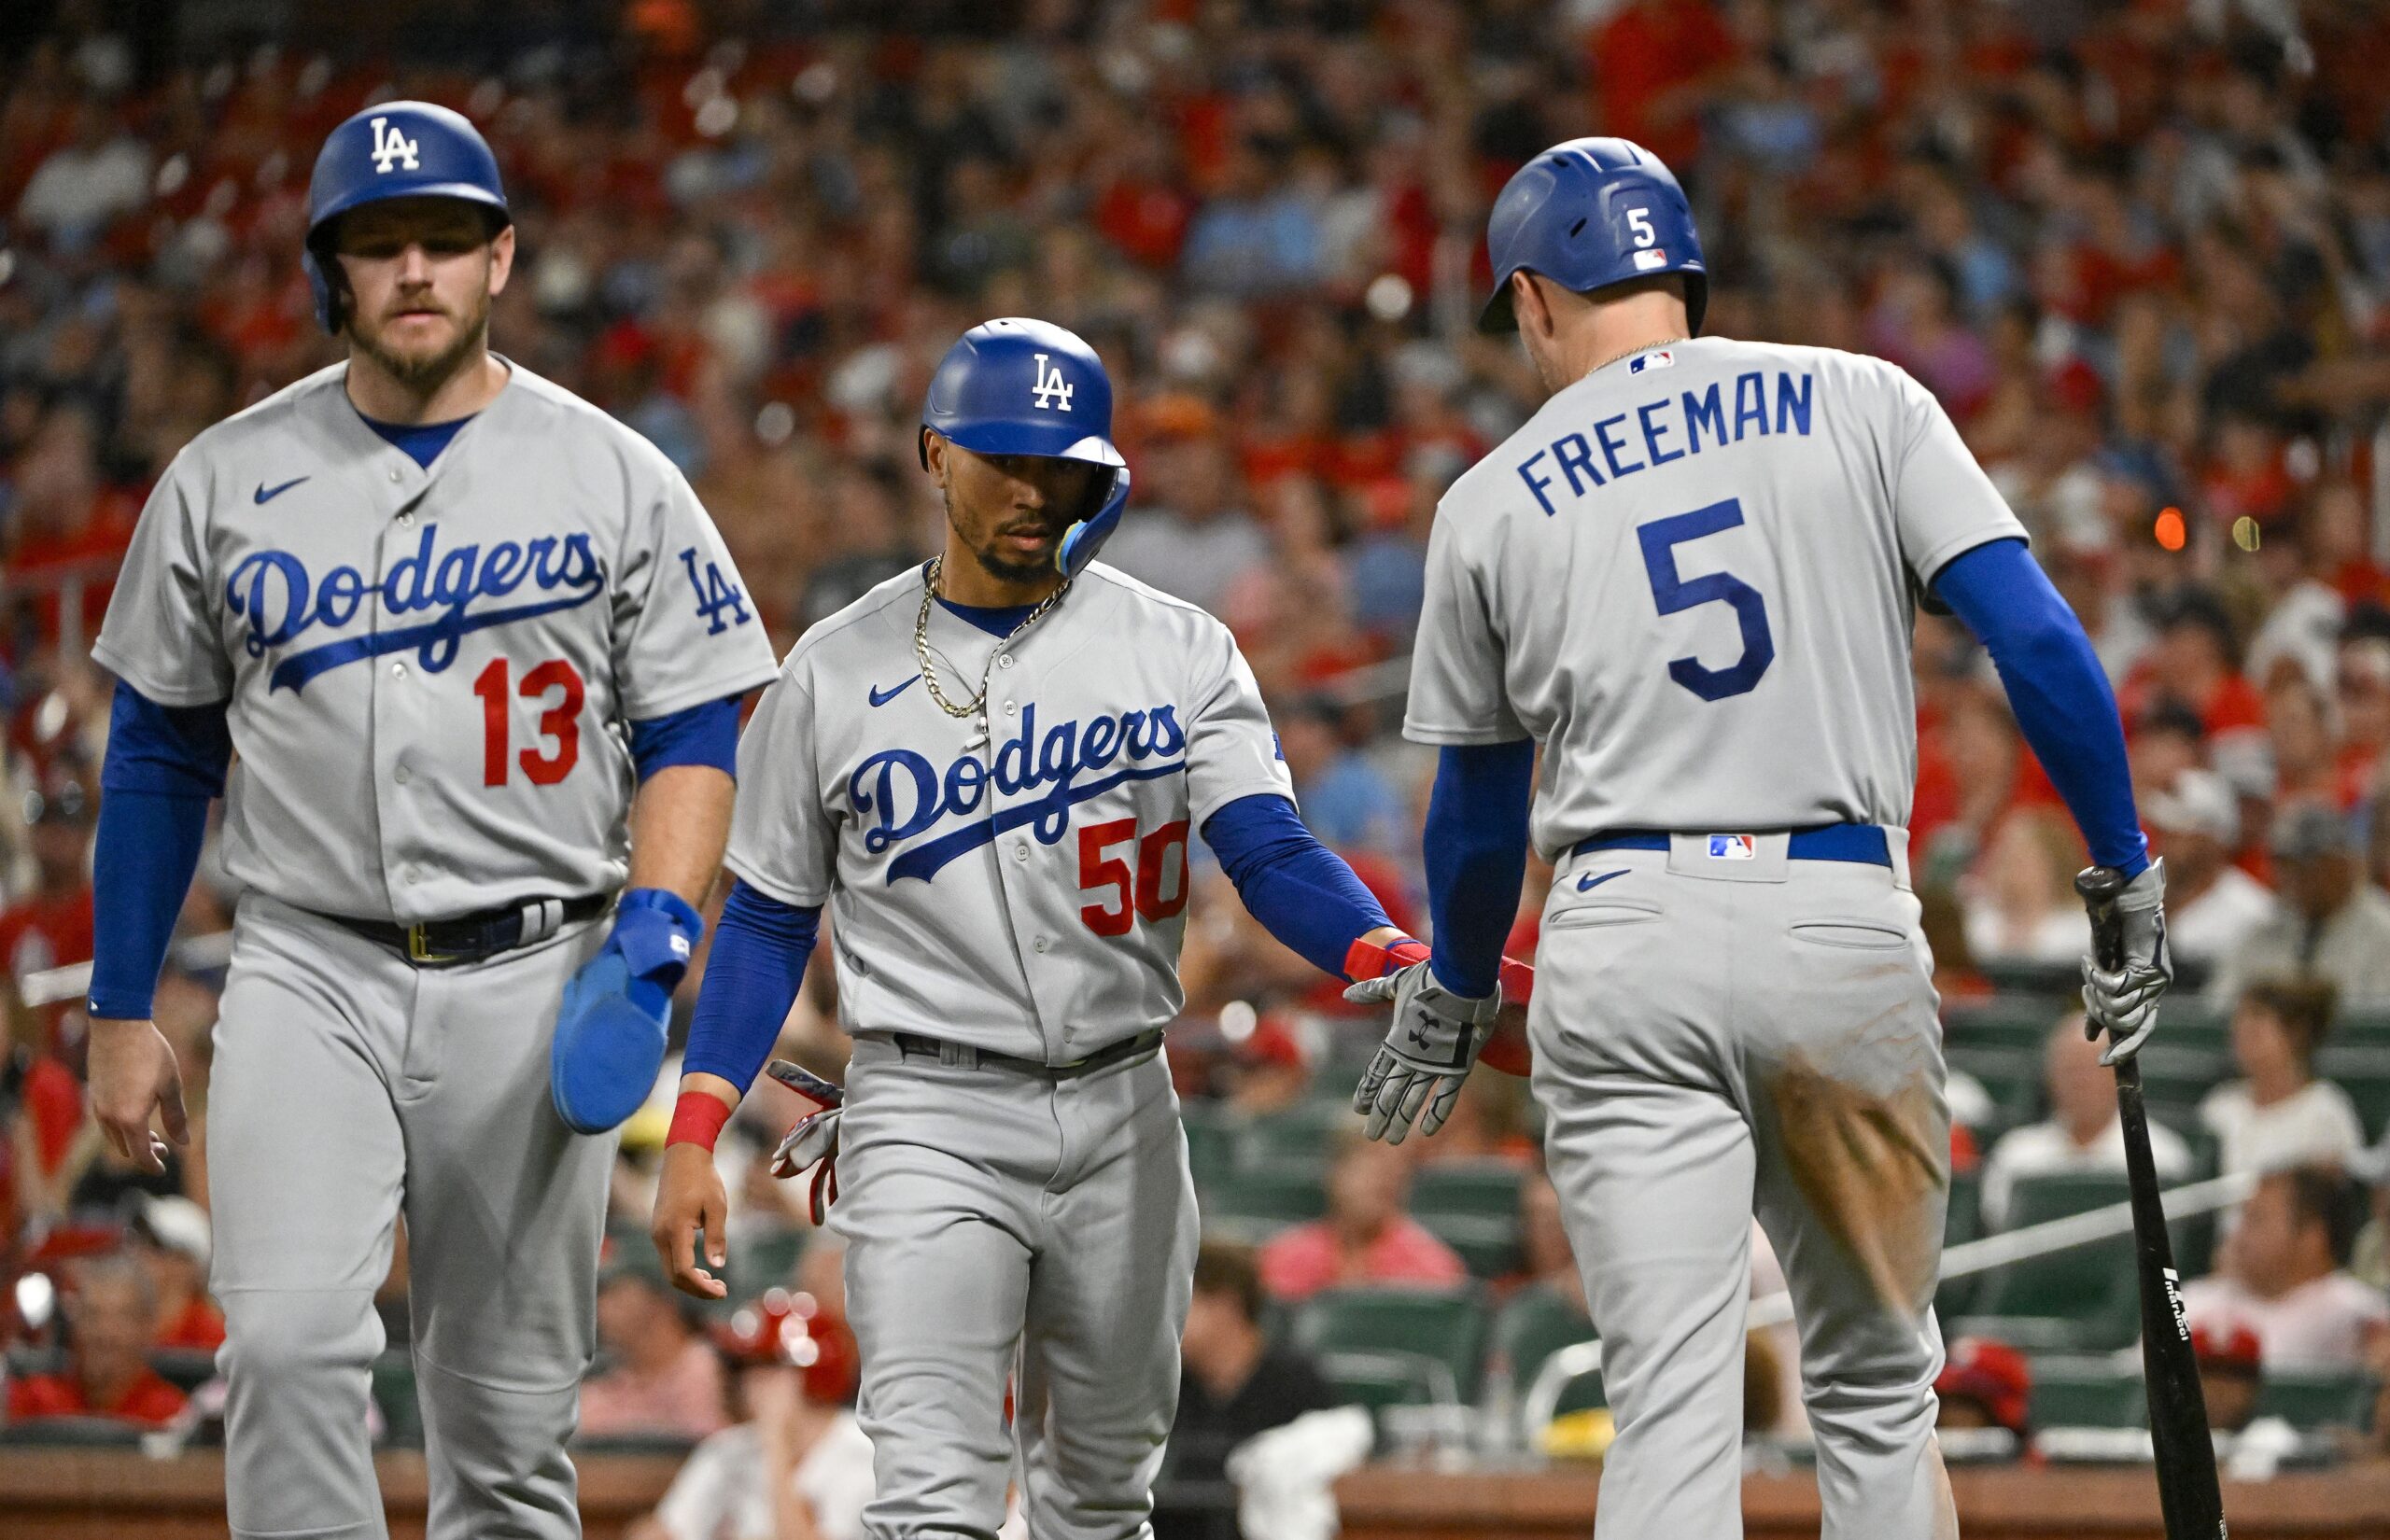 Victor Gonzalez's Return to Dominance for the Dodgers: How Did He Get Back?